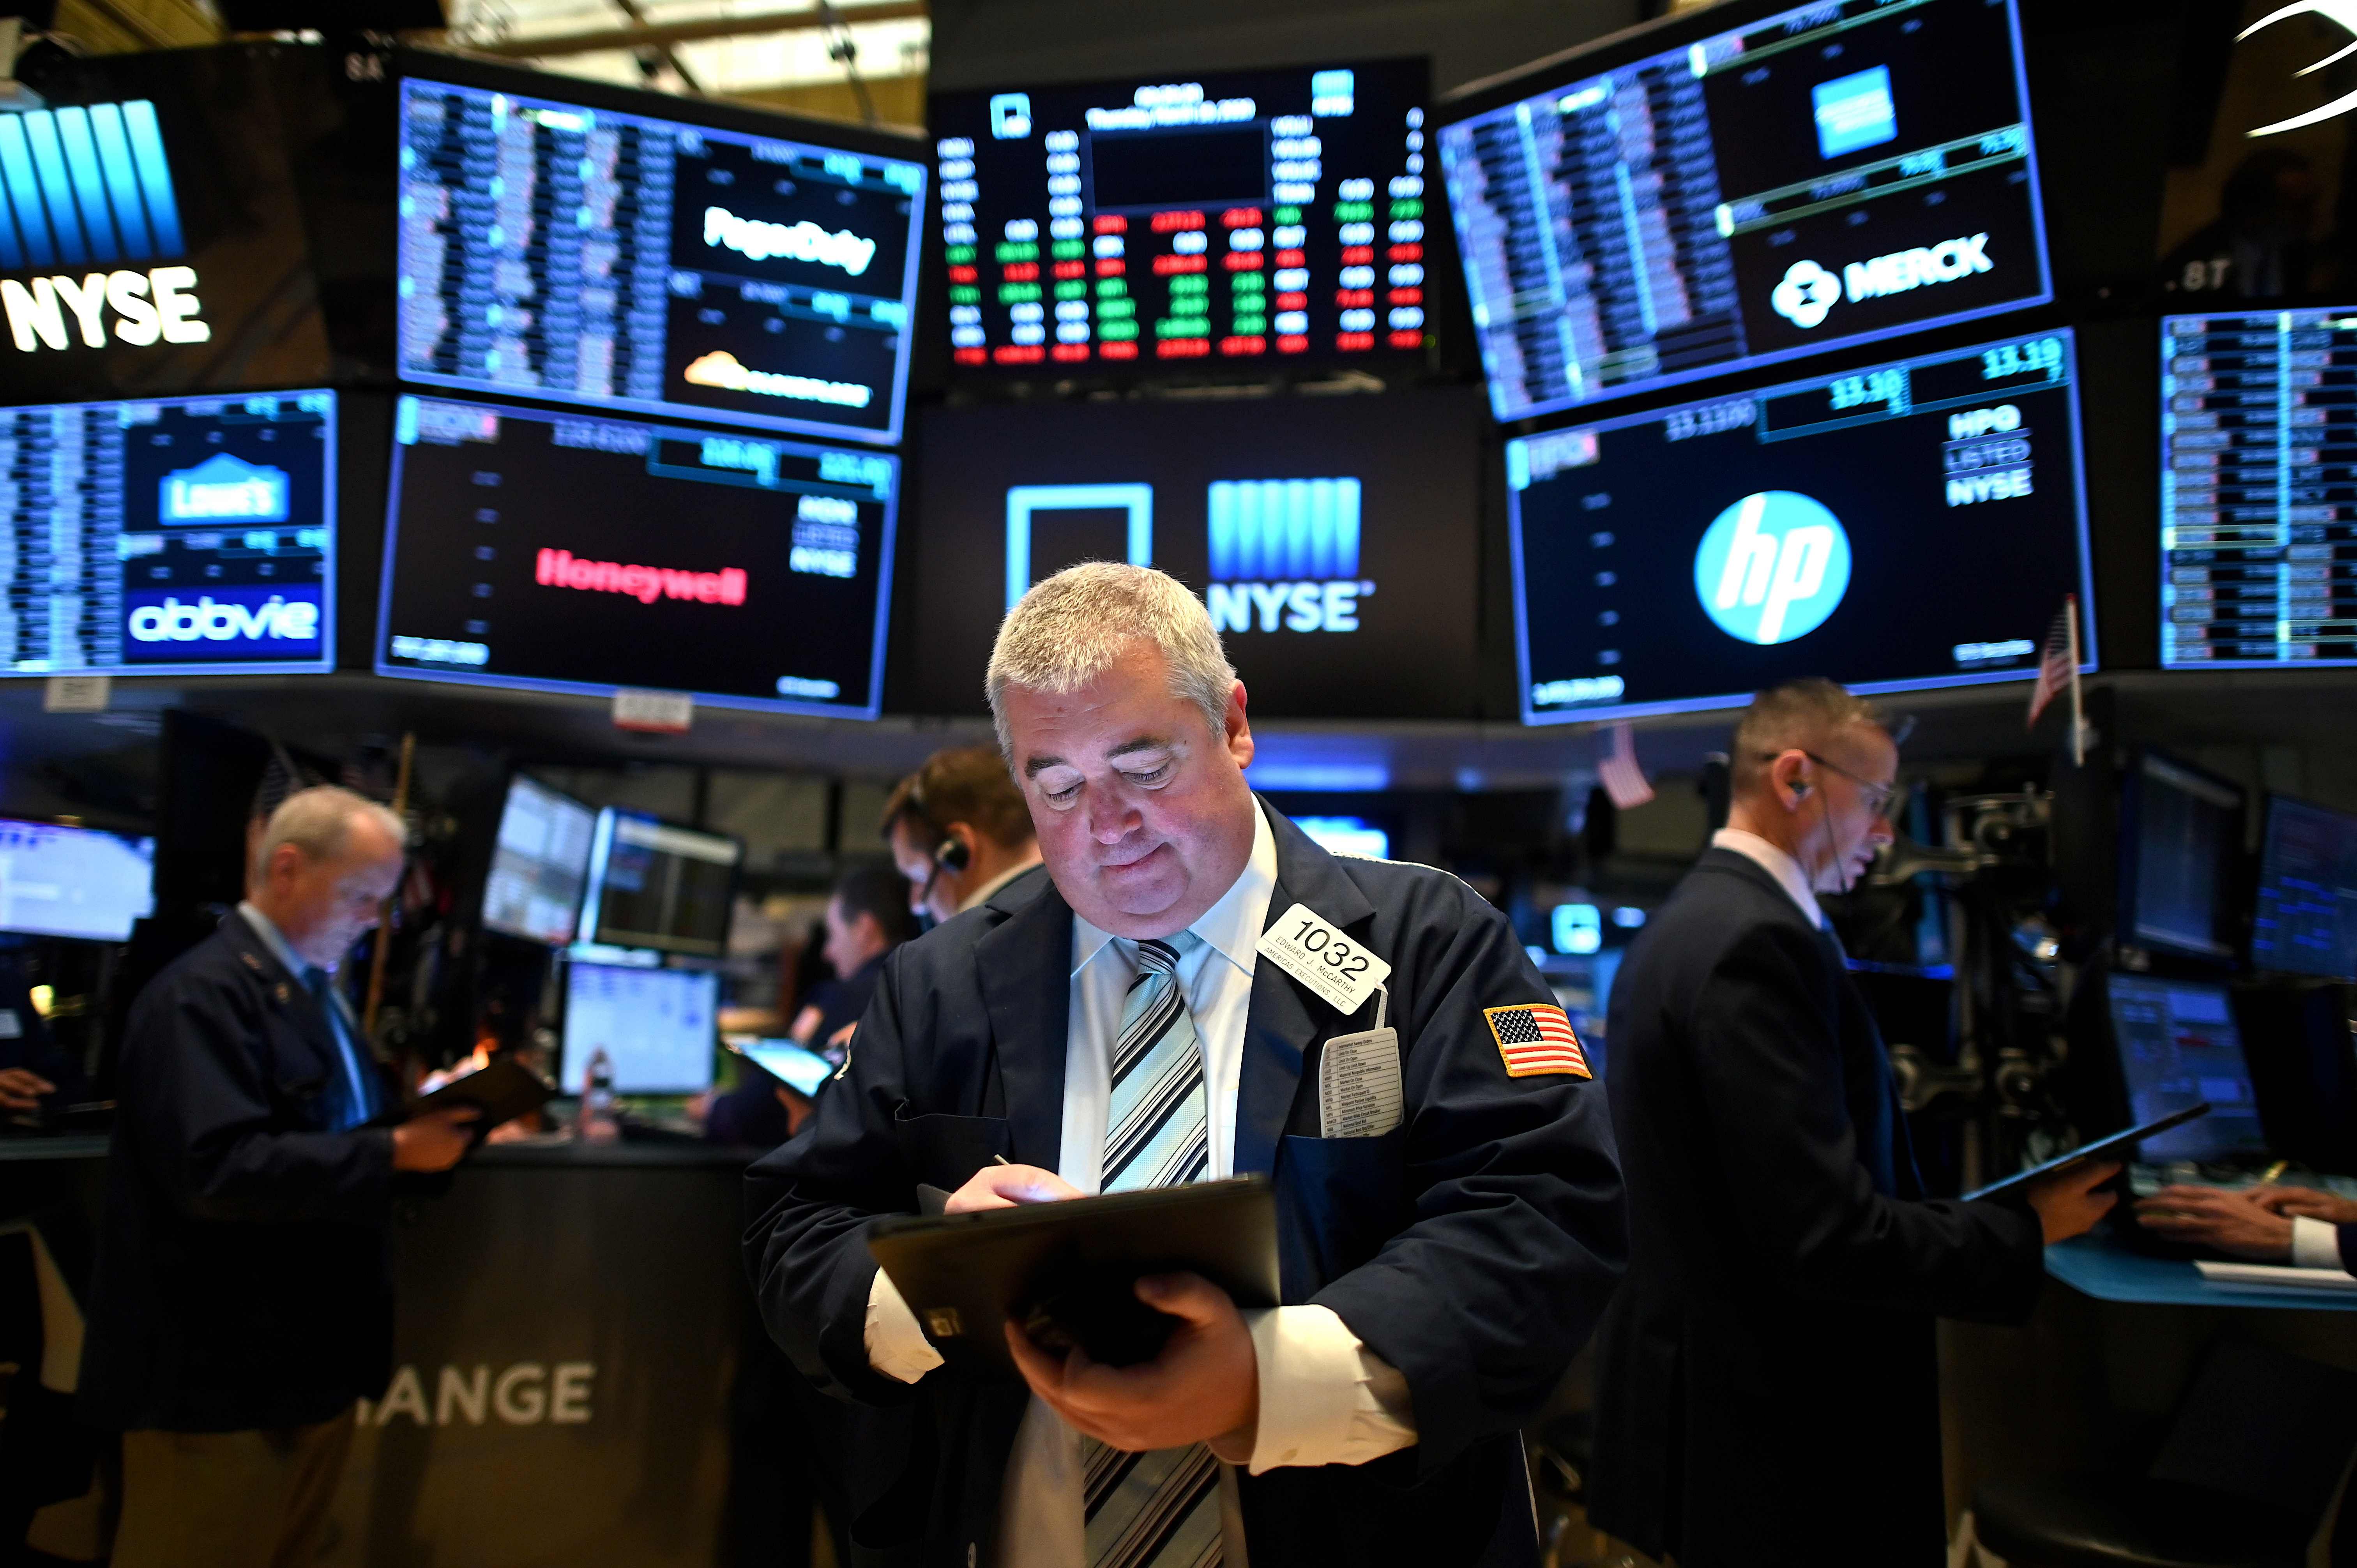 Global financial markets were ravaged by the rapid spread of the pandemic in the first quarter. But the market volatility benefited exchange operators such as Nasdaq, which make most of their money from clearing and settling trades. (AFP photo)